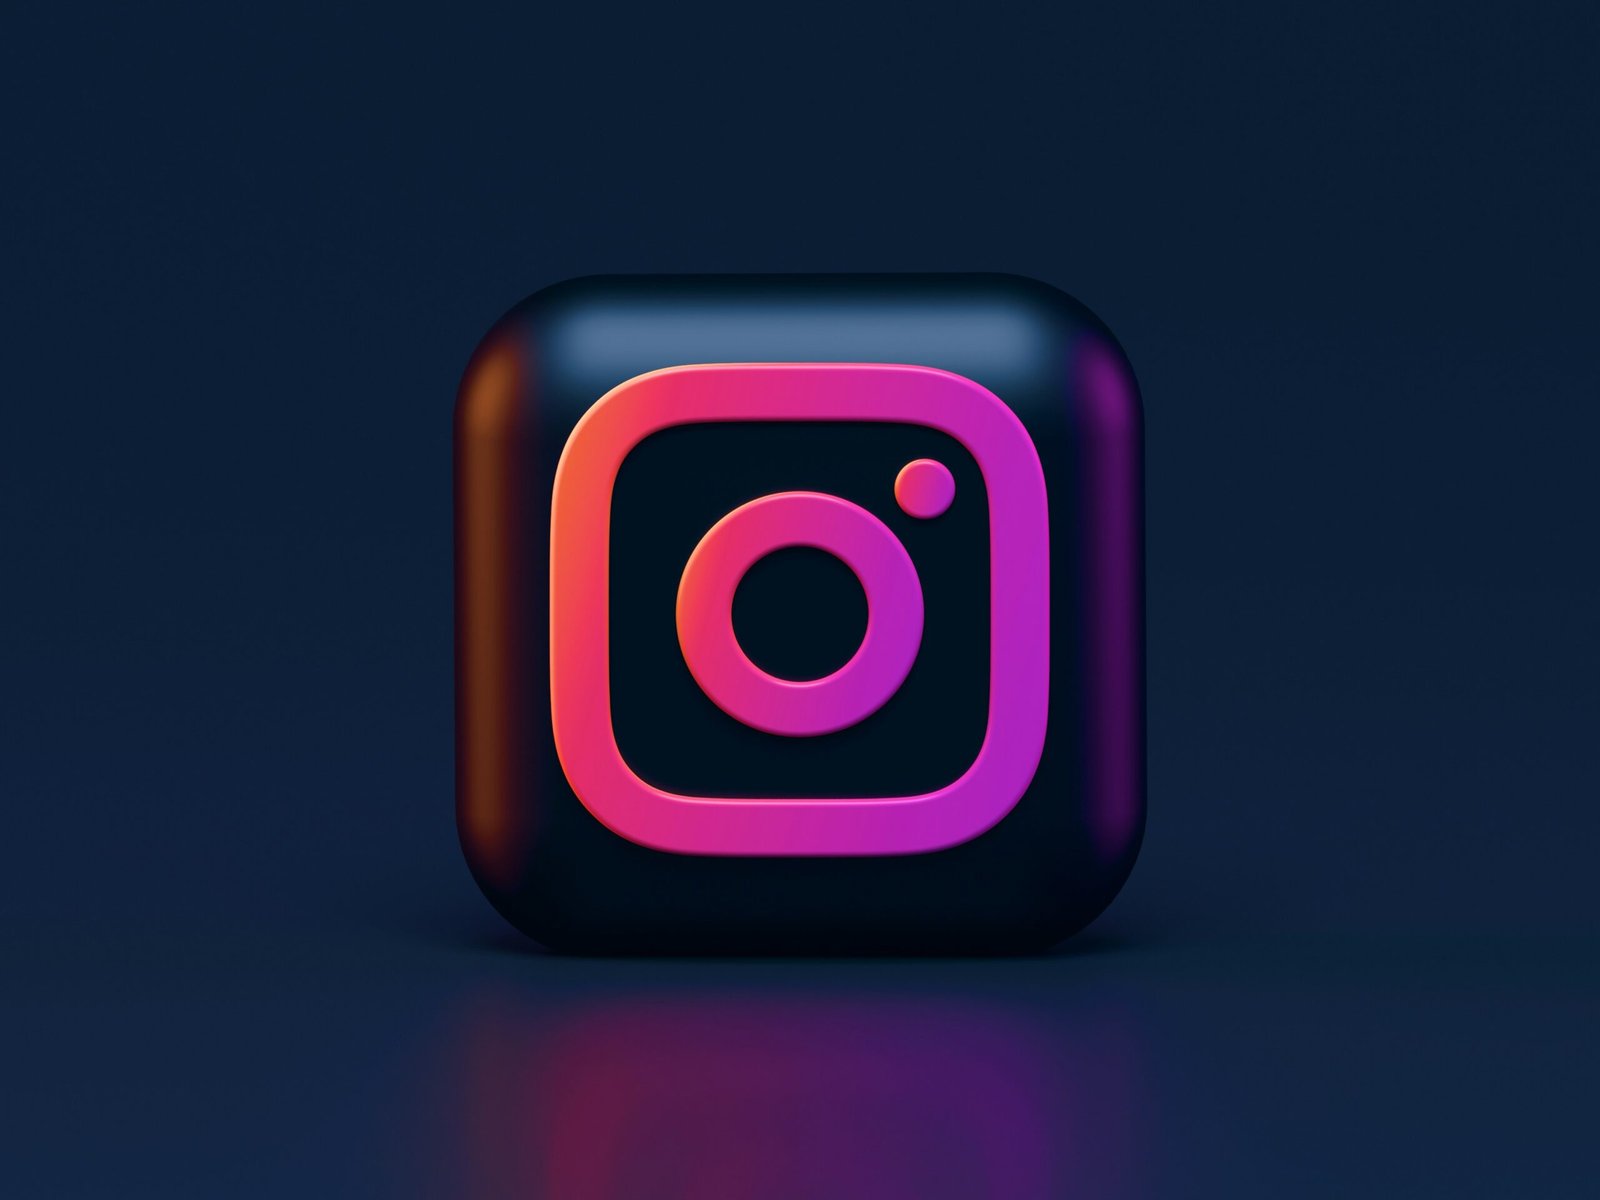 Buy Instagram with Tha Social Media Pro: The Best Website to Buy Instagram Followers